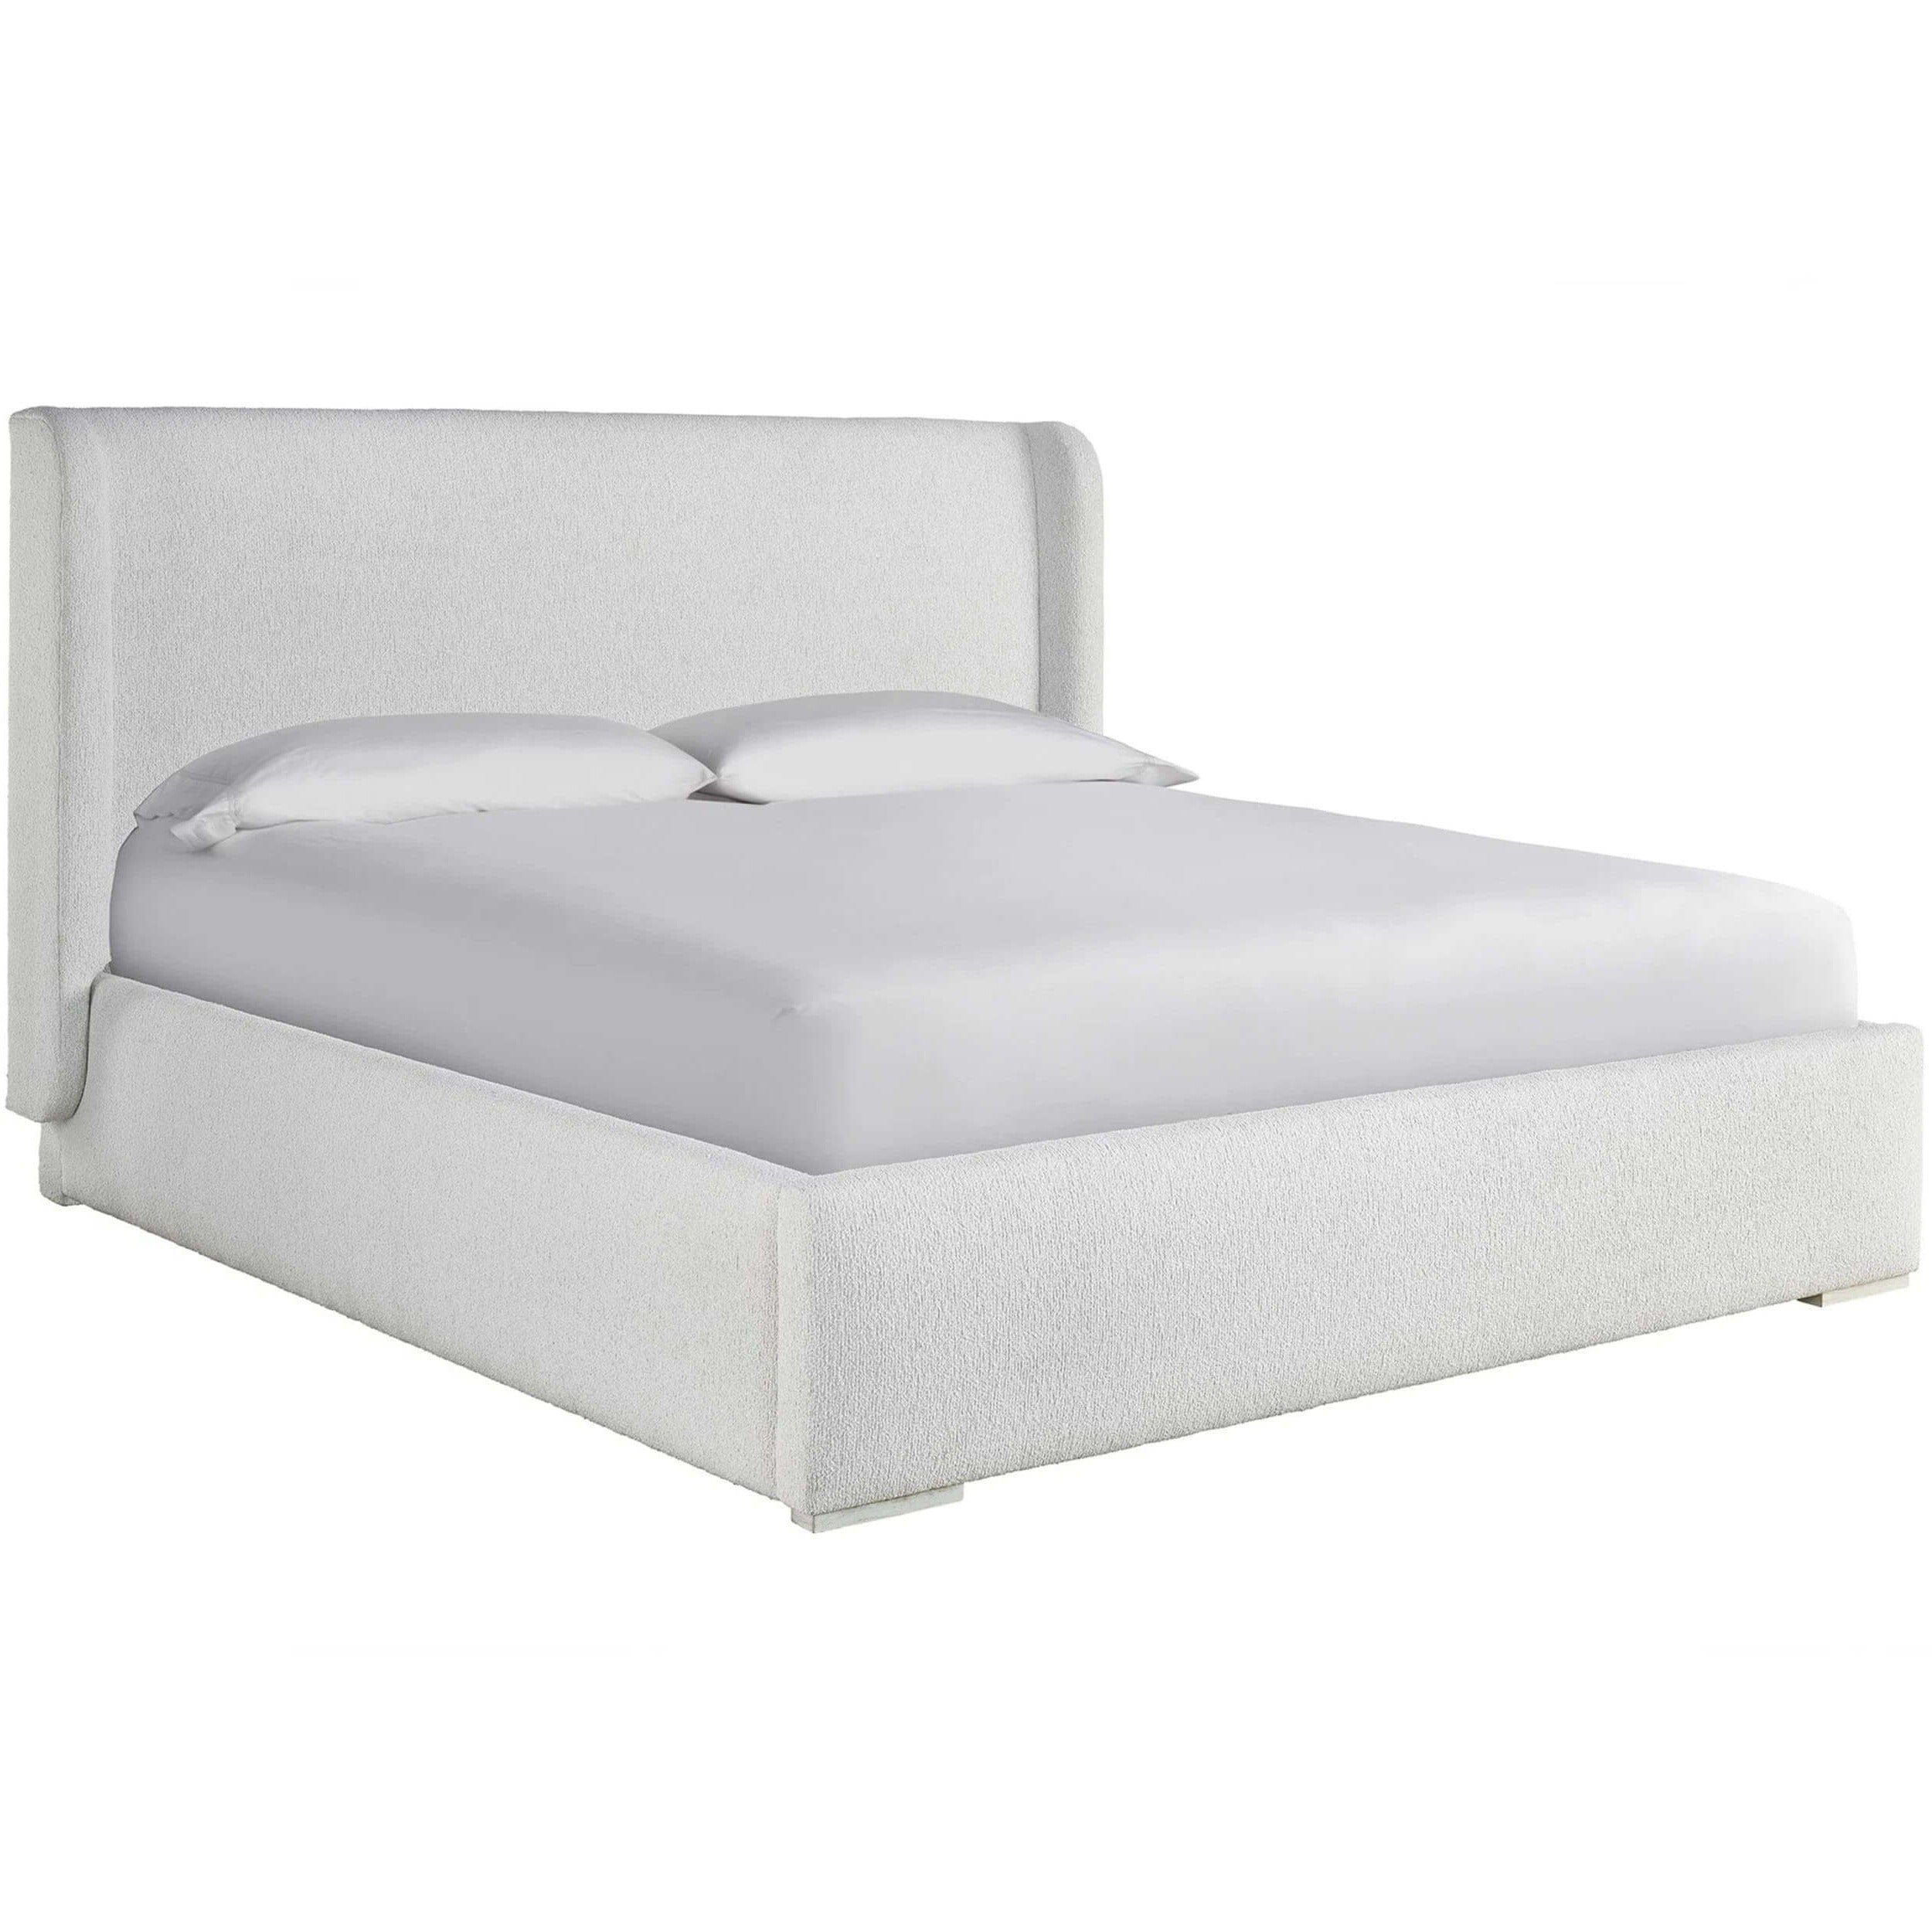 Image of Restore Bed